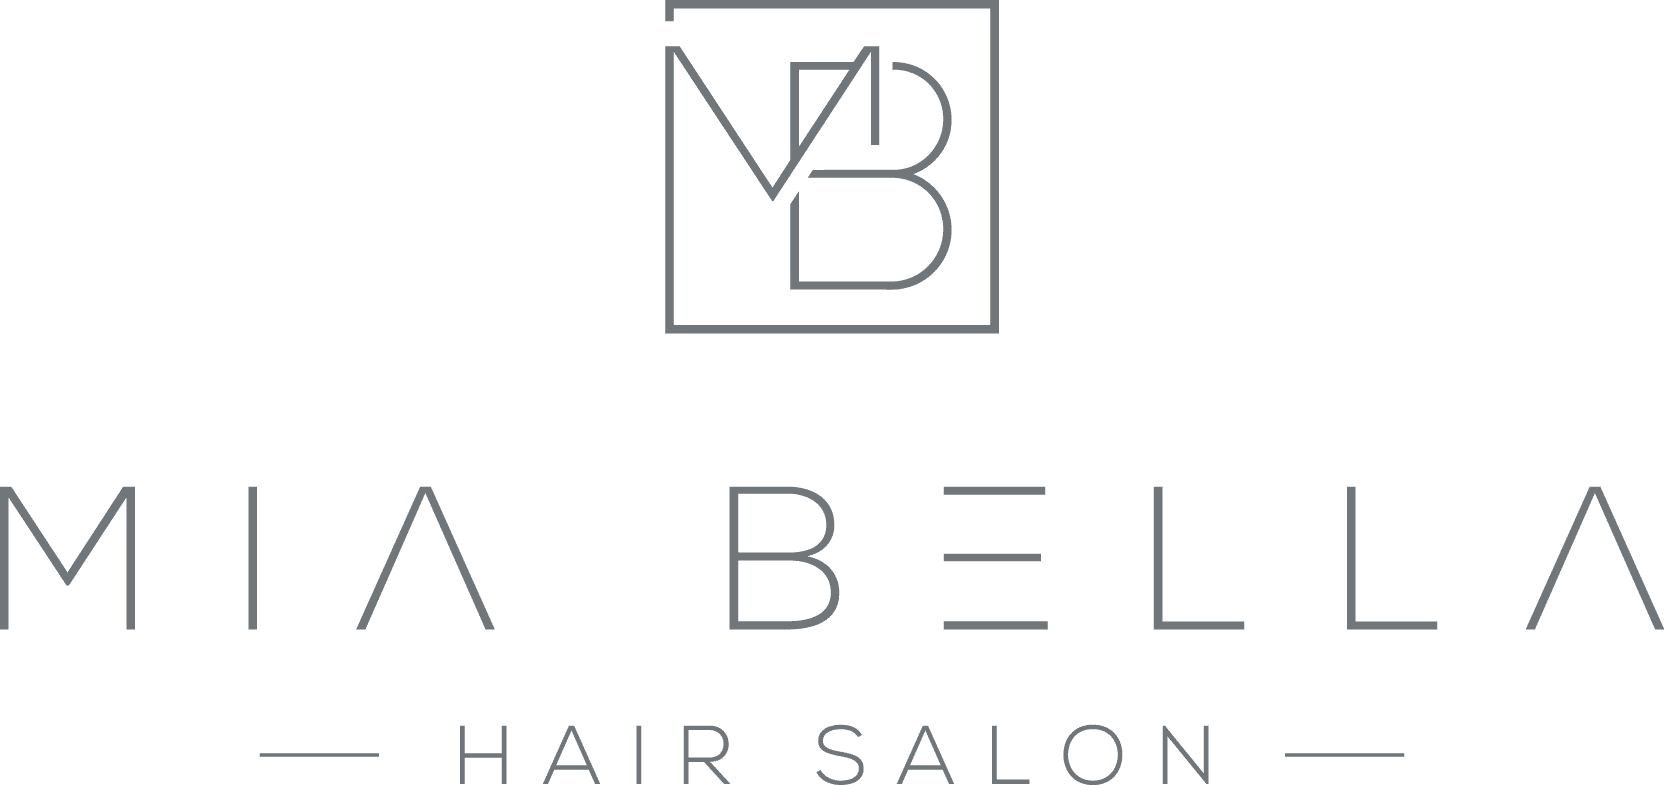 Starting A Hair Salon Can Be An Exciting New Business Venture, But You Must Remember That Small T ...